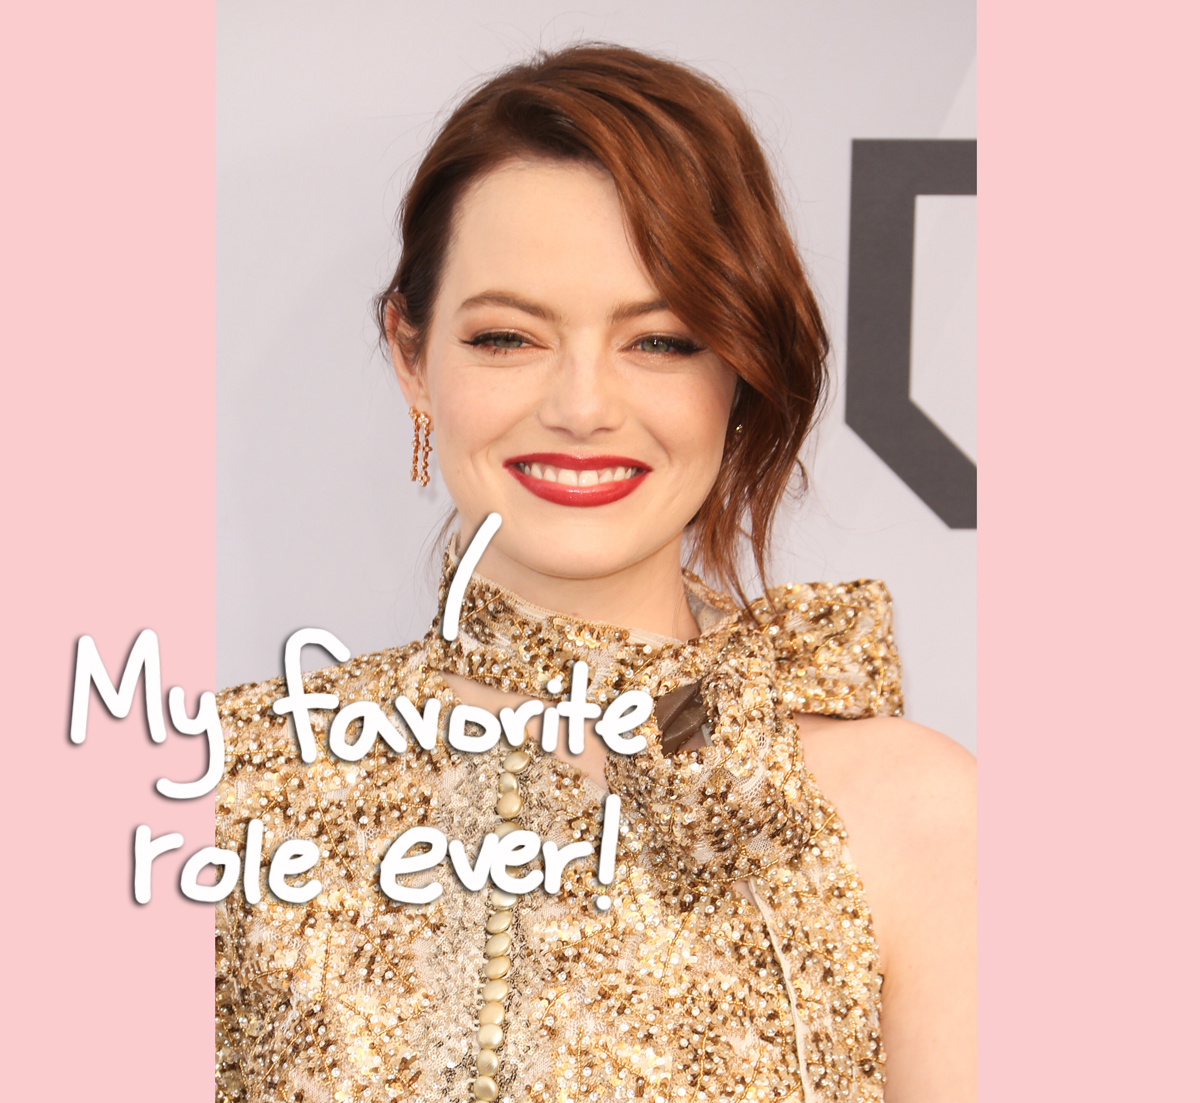 Emma Stone In 'New Dimension Of Bliss' After Welcoming First Child